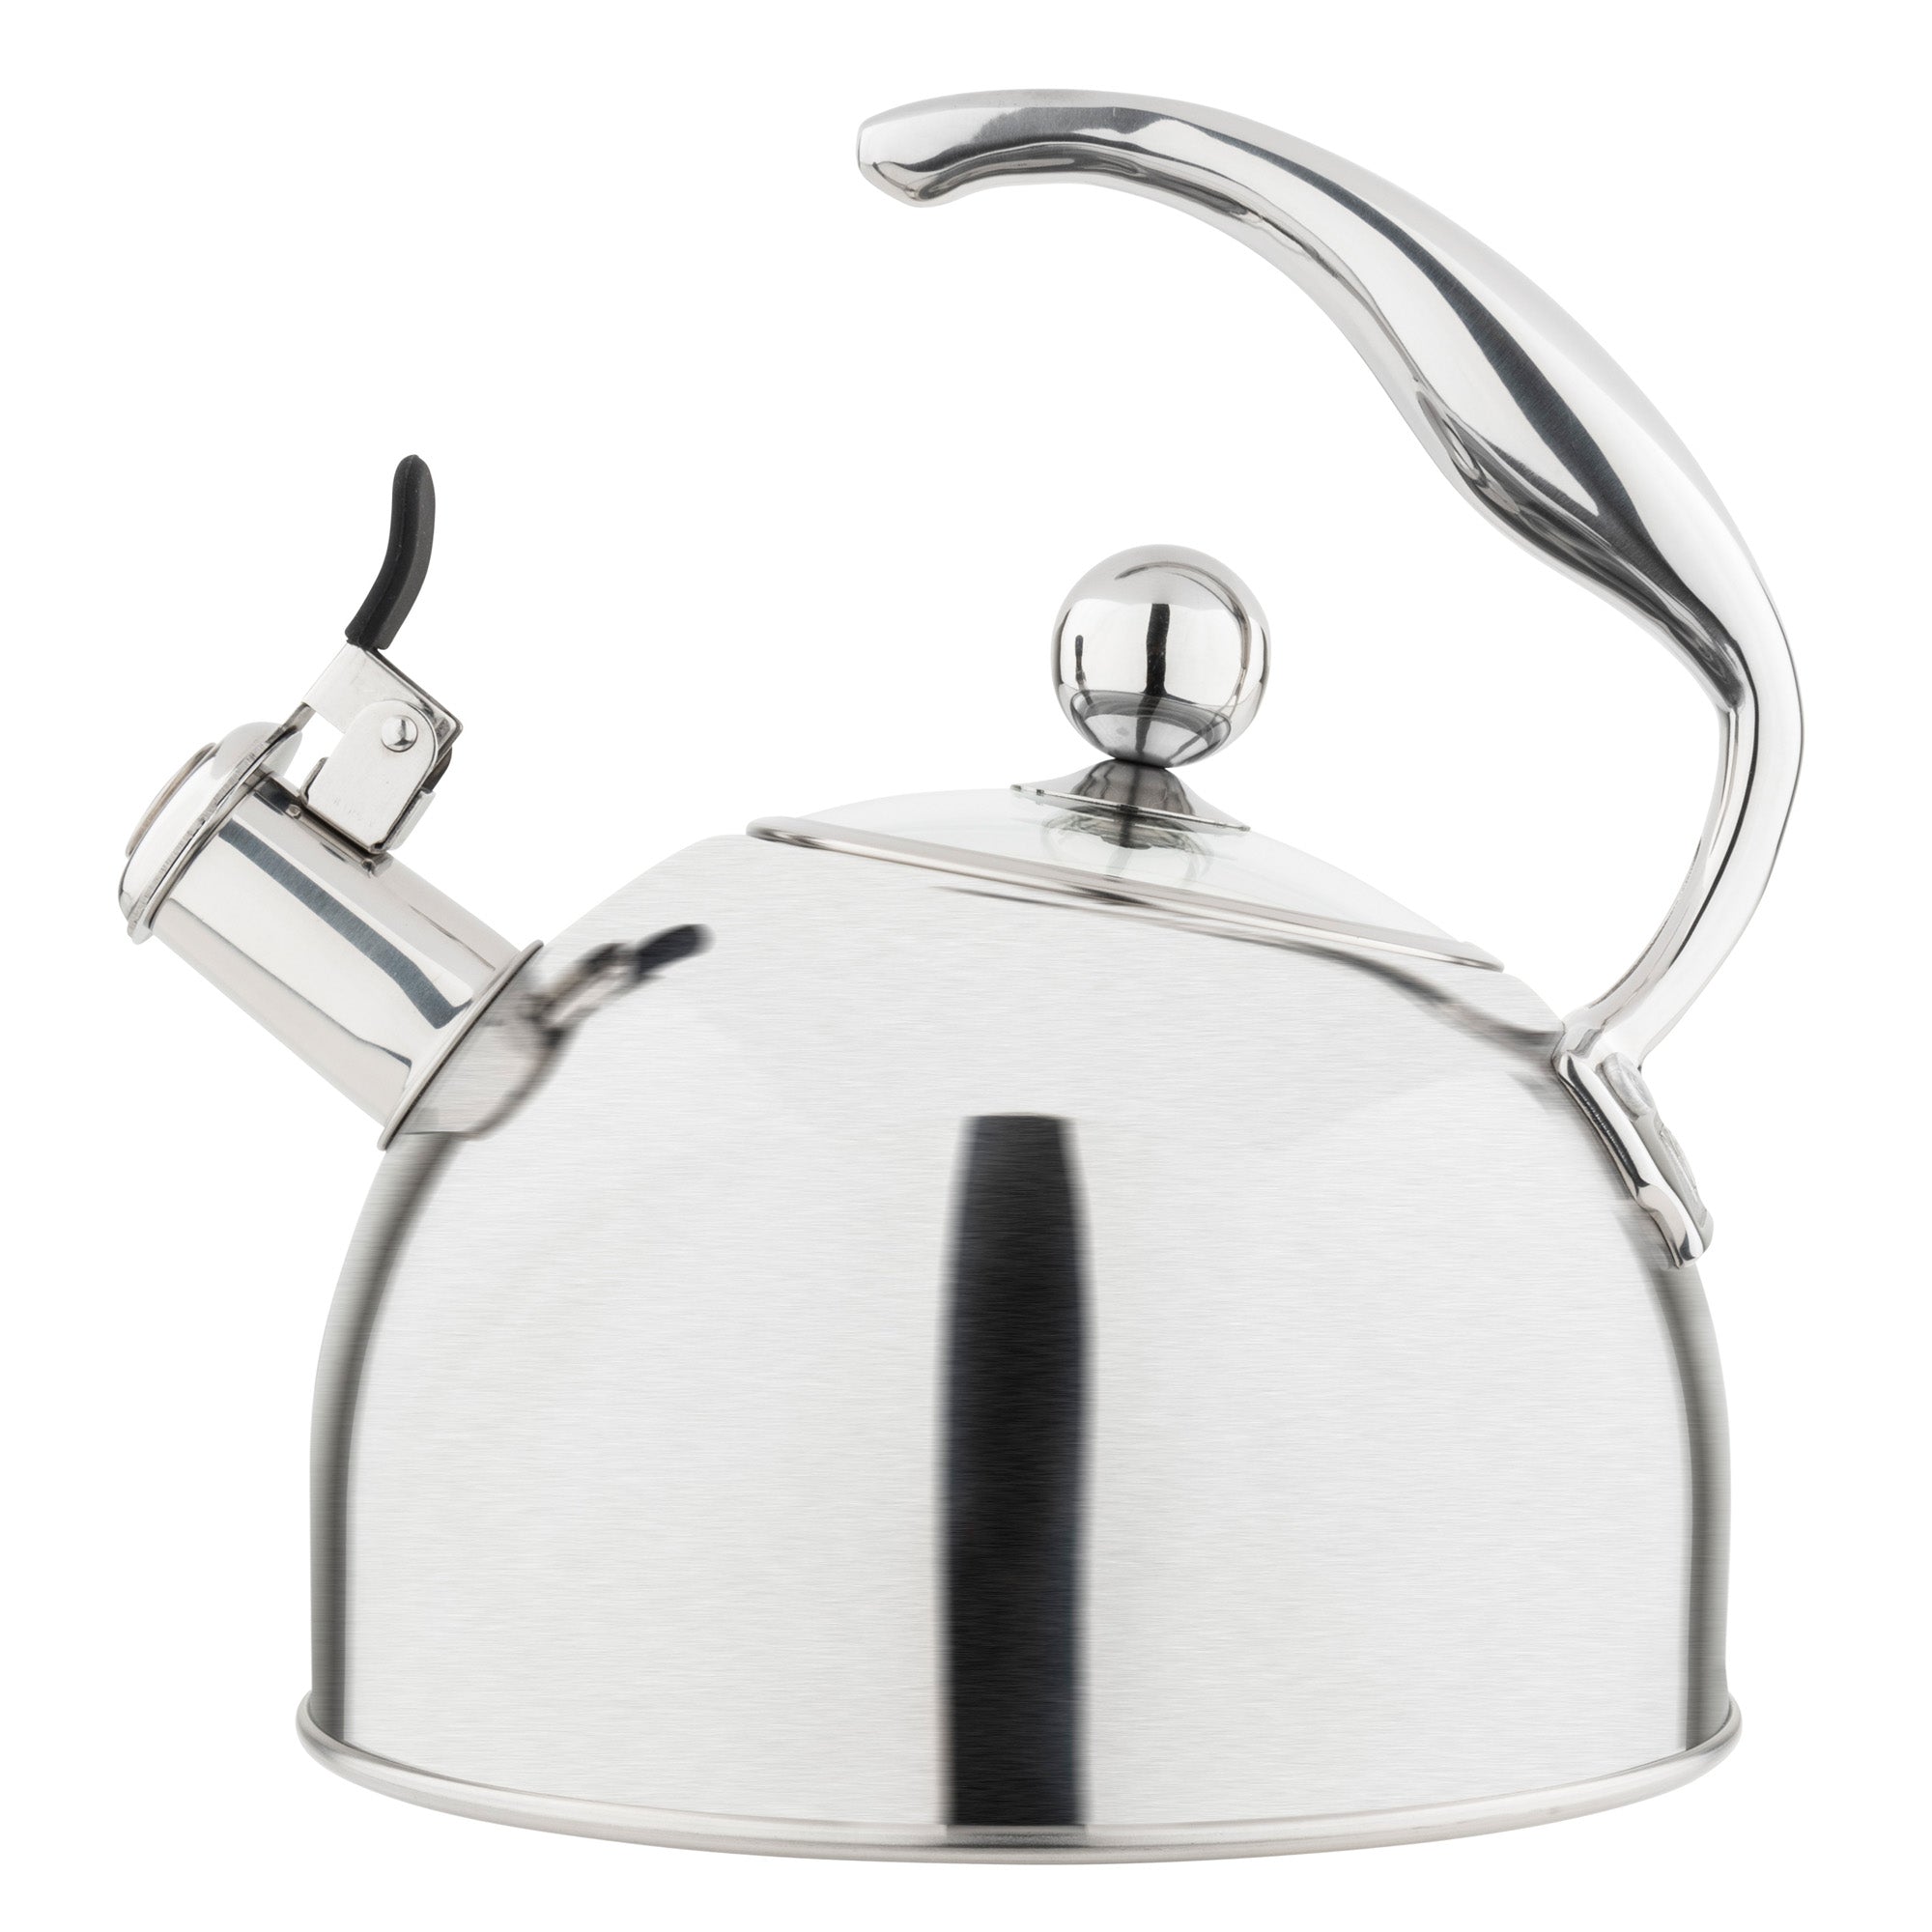 1 Set 2l Electric Water Kettle Energy-efficient Fast Boiling Fast